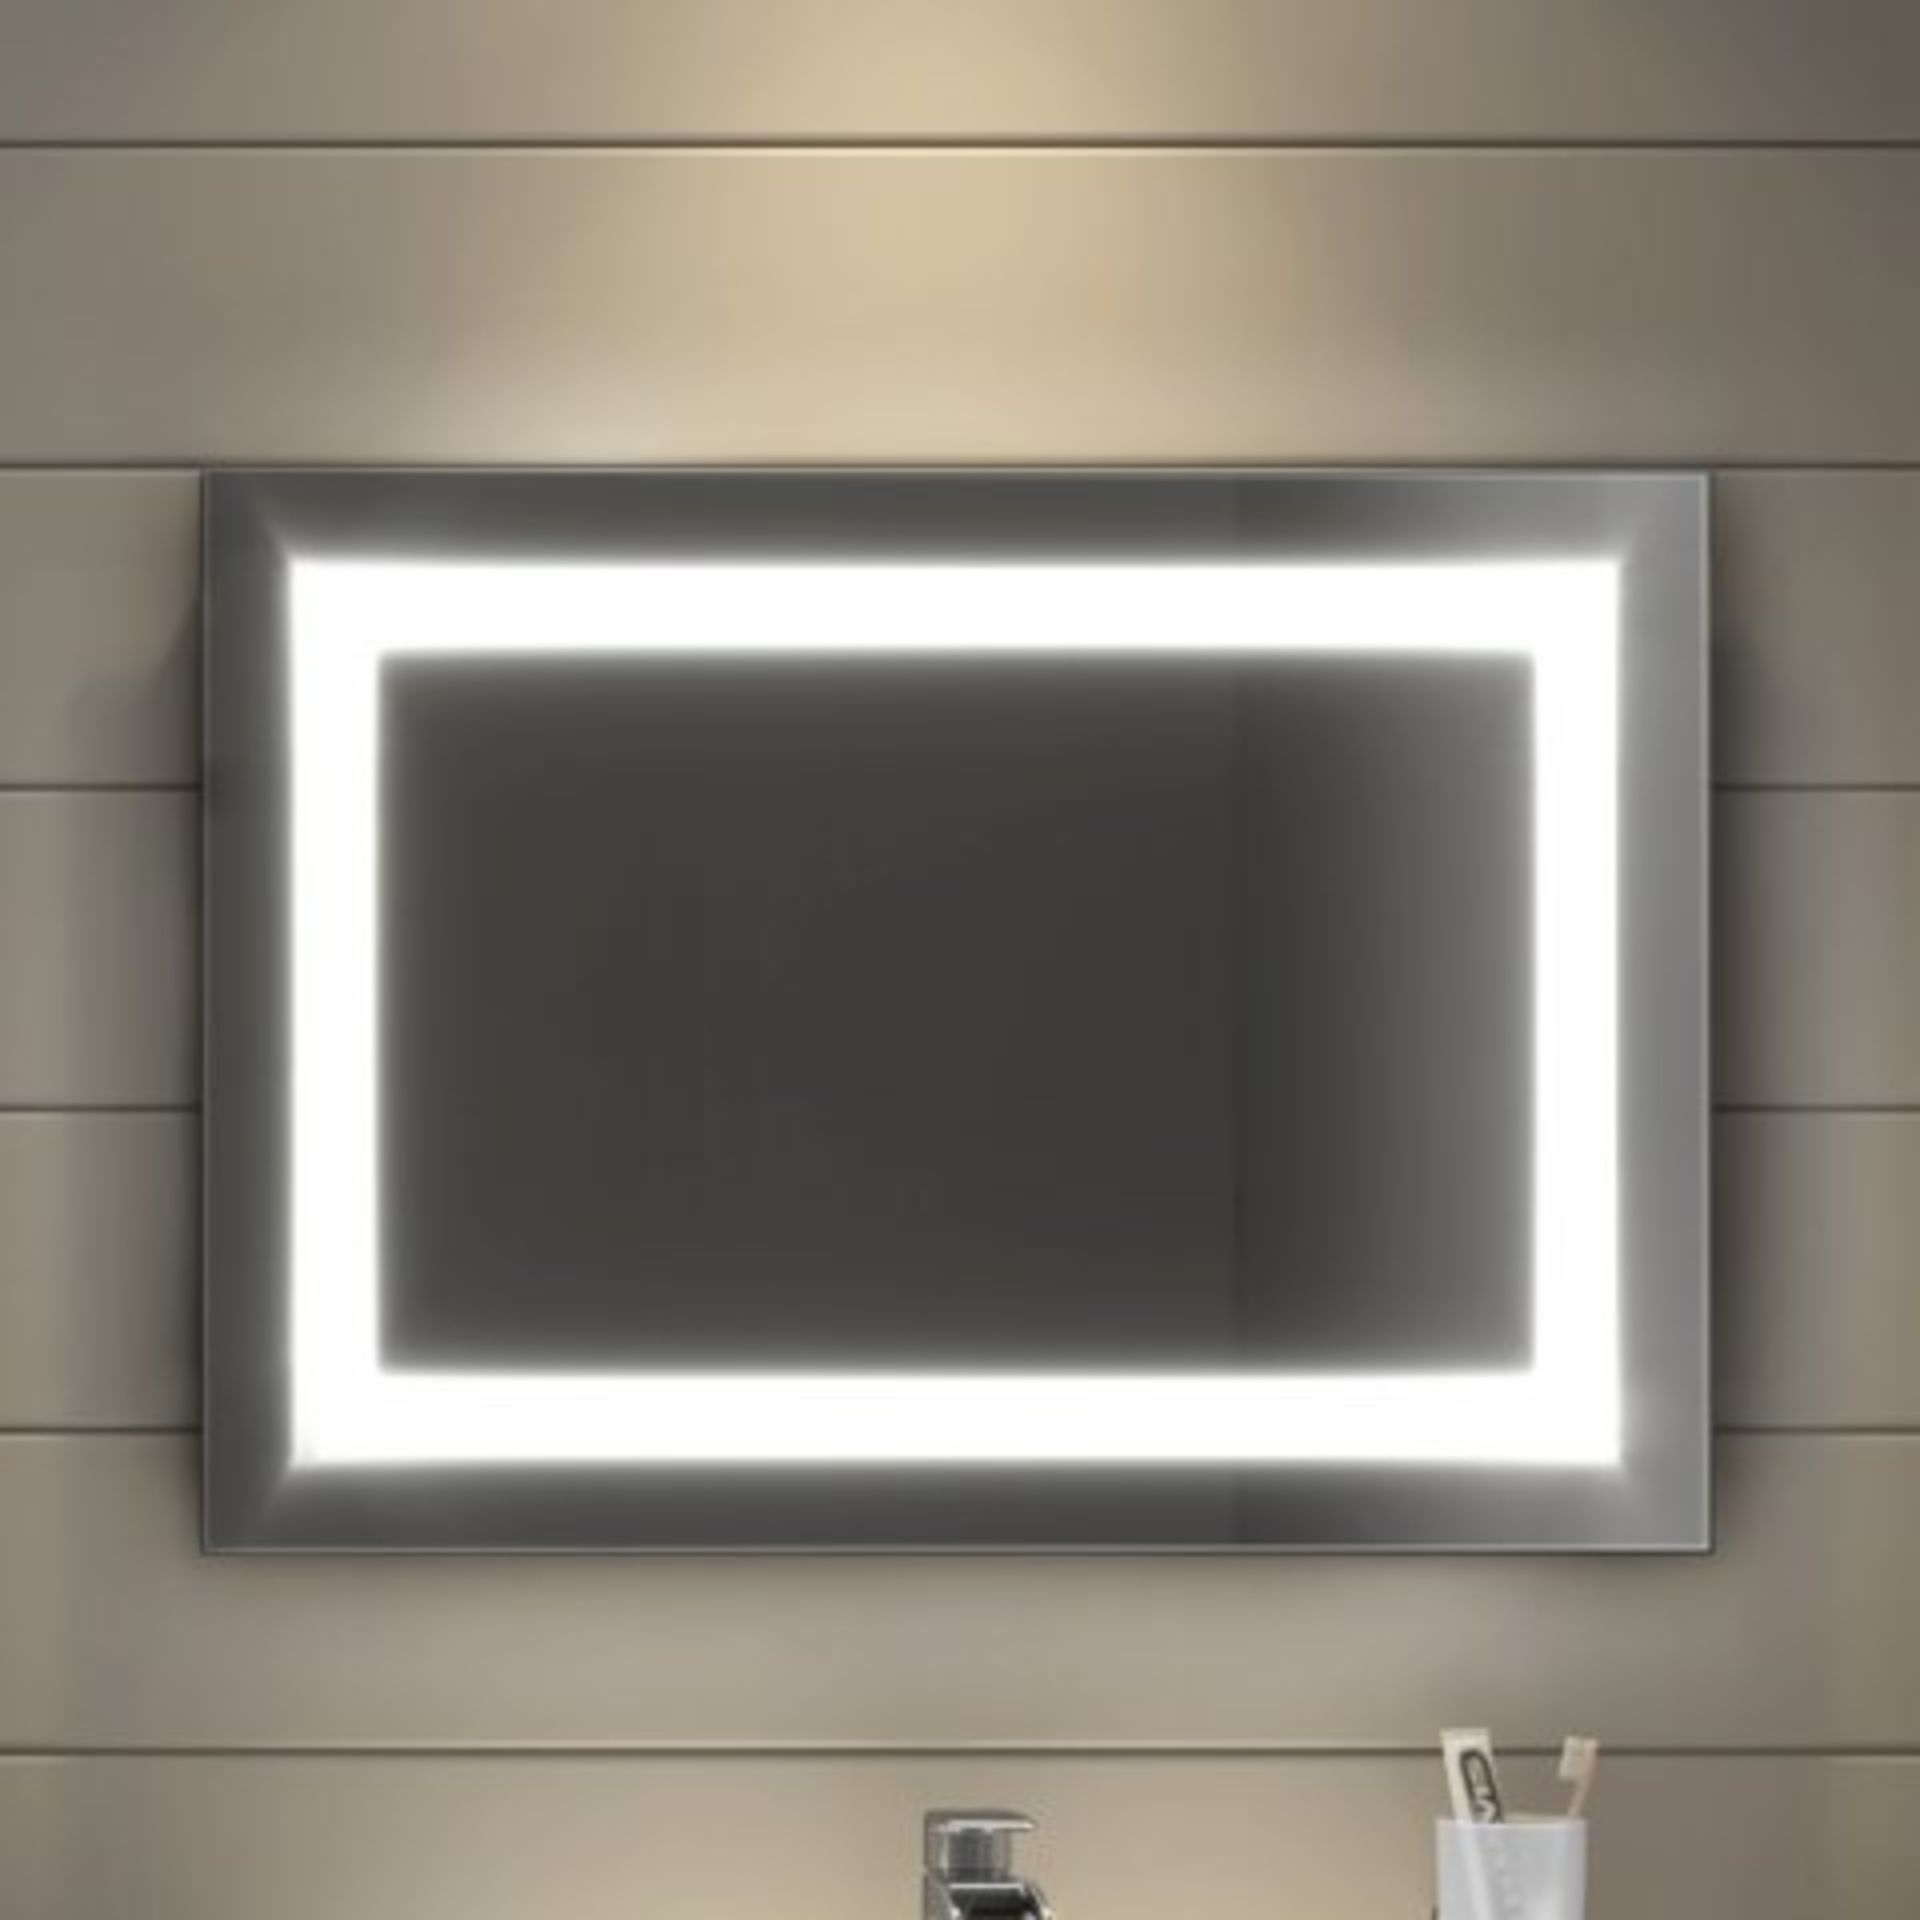 (JL33) 500x700mm Nova Illuminated LED Mirror. We love this because it is the perfect fit for an... - Image 3 of 4